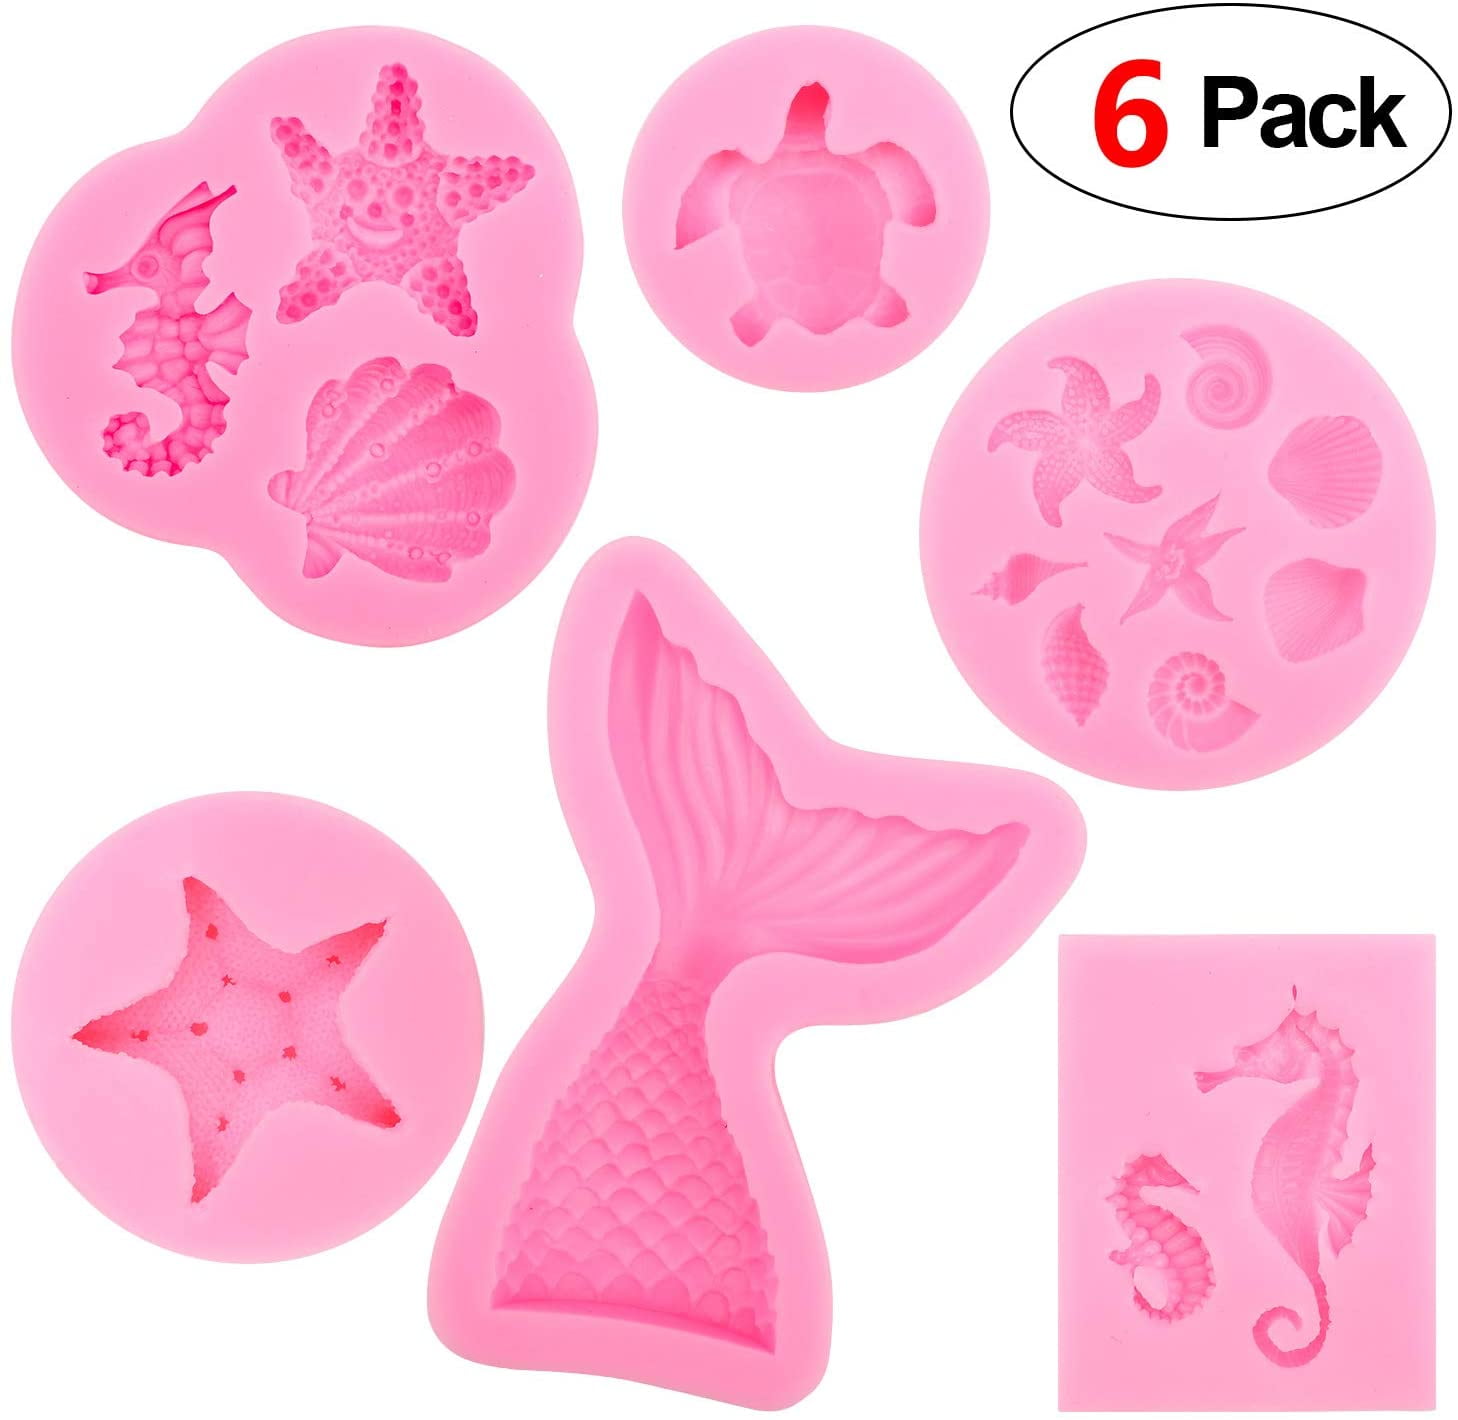 Mermaid Tail Scale Silicone Fondant Mould Candy Cake Decor Sugarcraft Icing Mold 